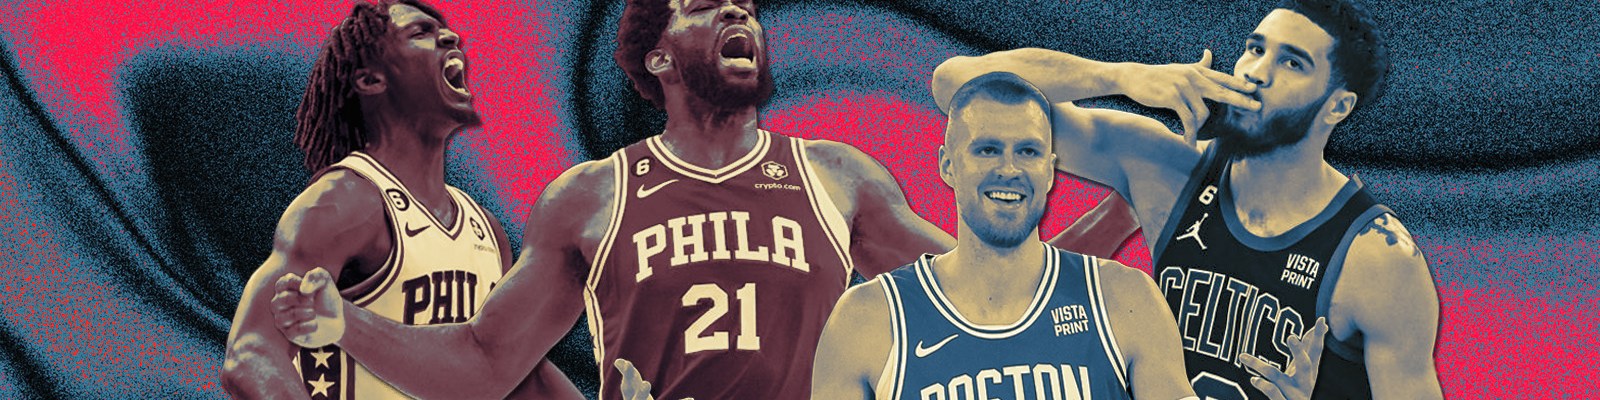 The 10 Best ‘NBA Jam’ Duos In Today’s NBA, Ranked